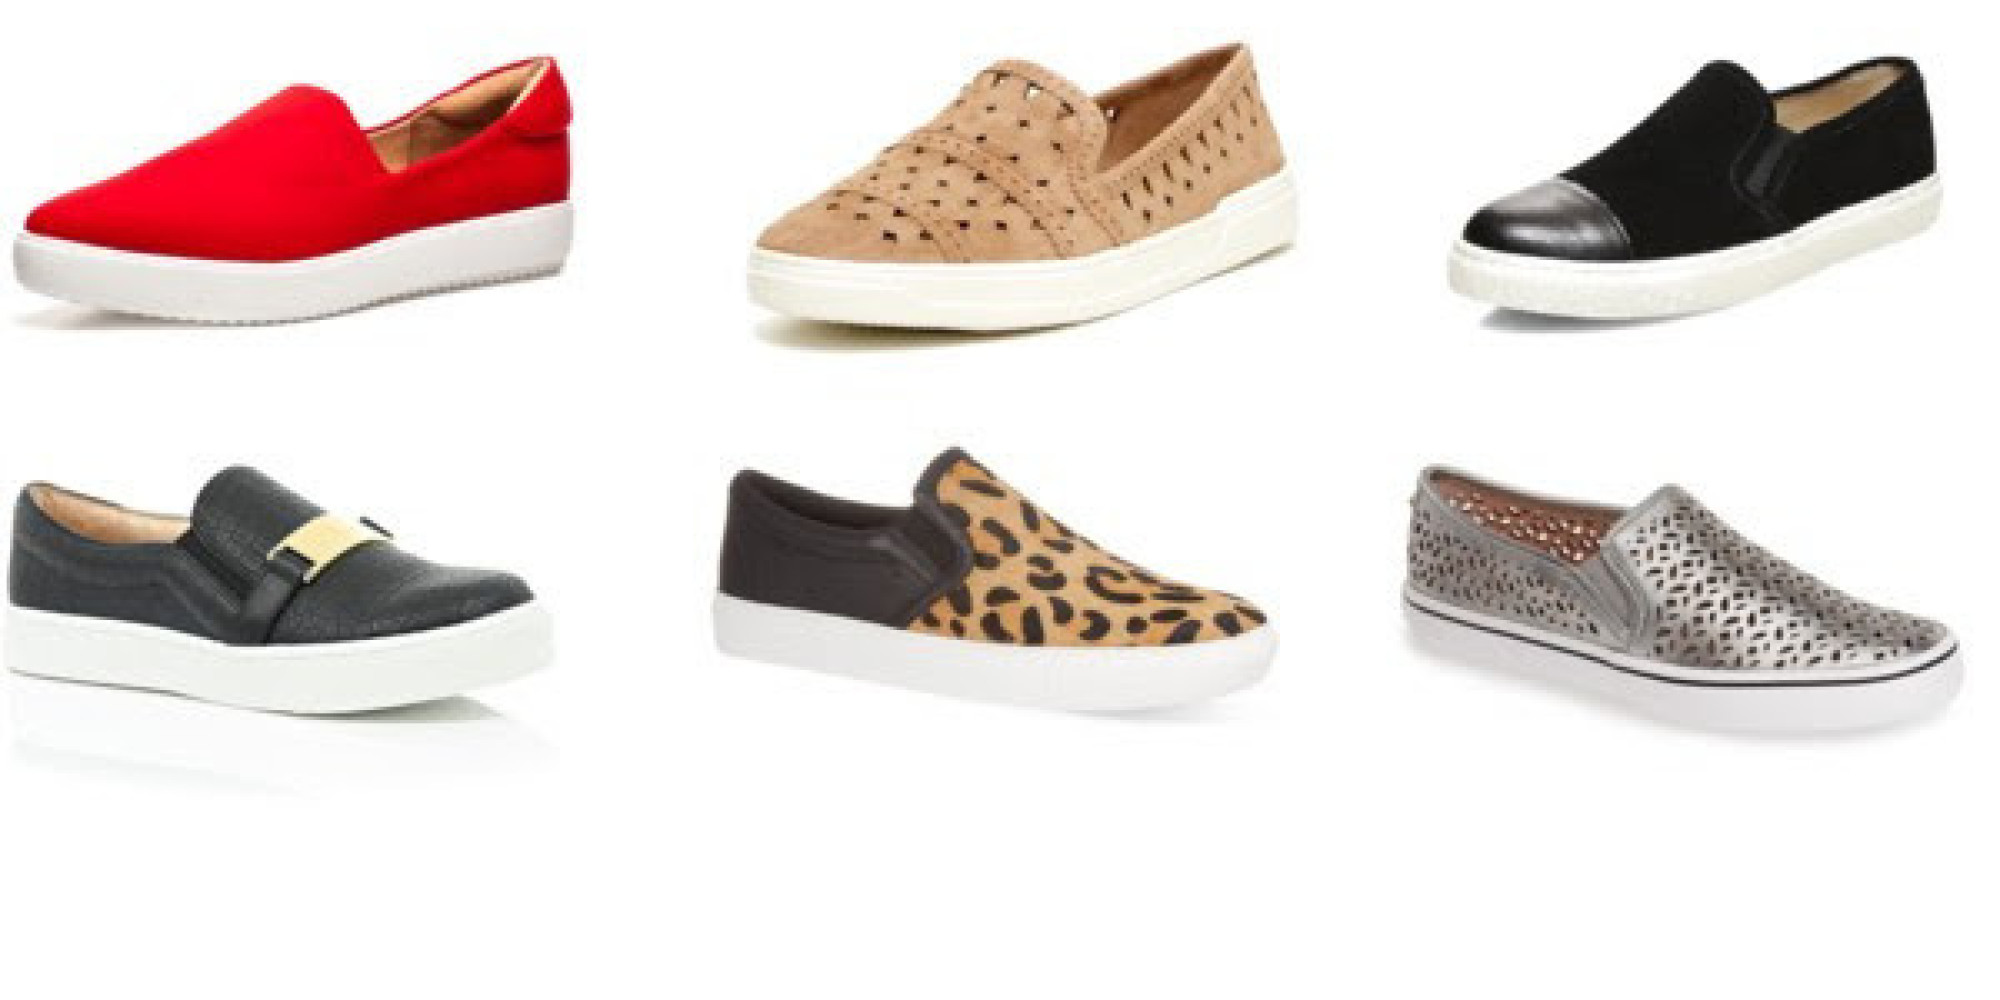 Slip-On Sneakers Are The Solution To A More Comfortable And Chic Work ...